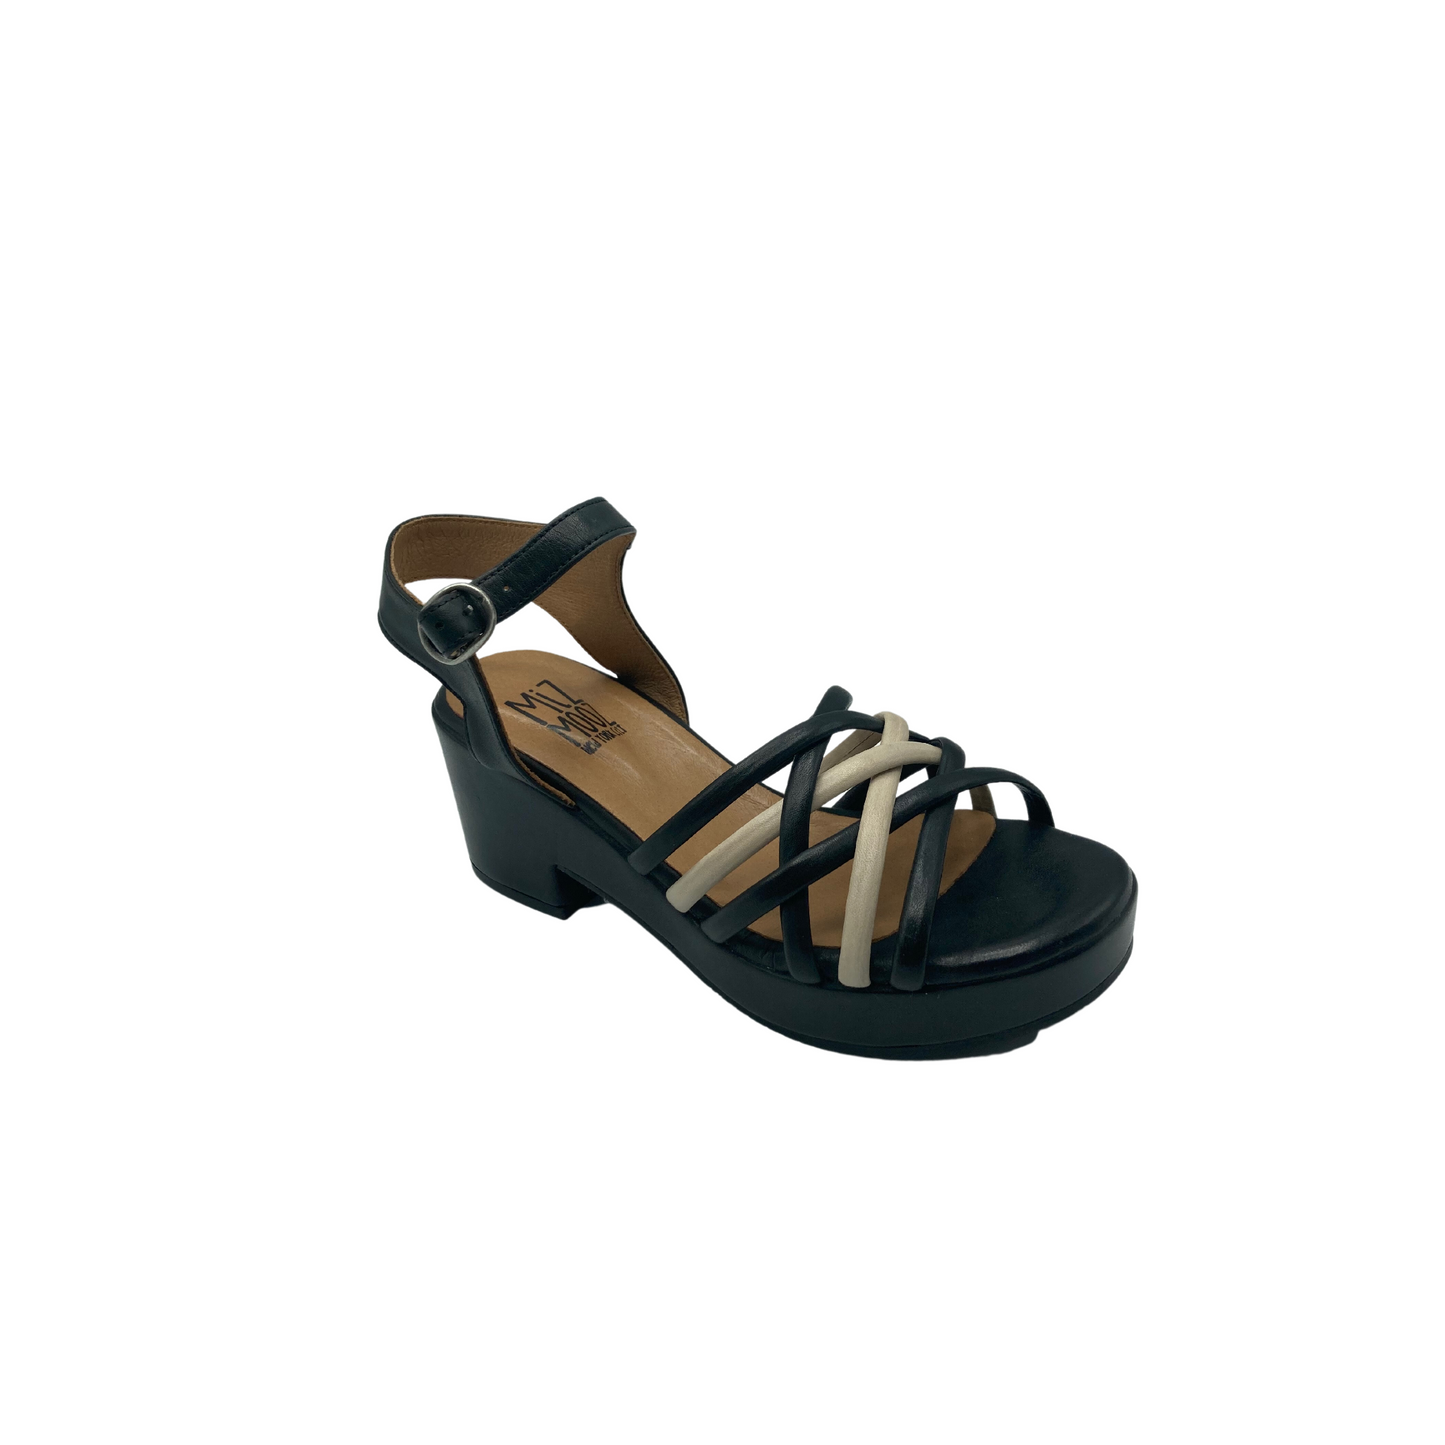 Angled side view of a strappy casual sandal by Miz Mooz.  Neutral colors - black base with cream and black straps